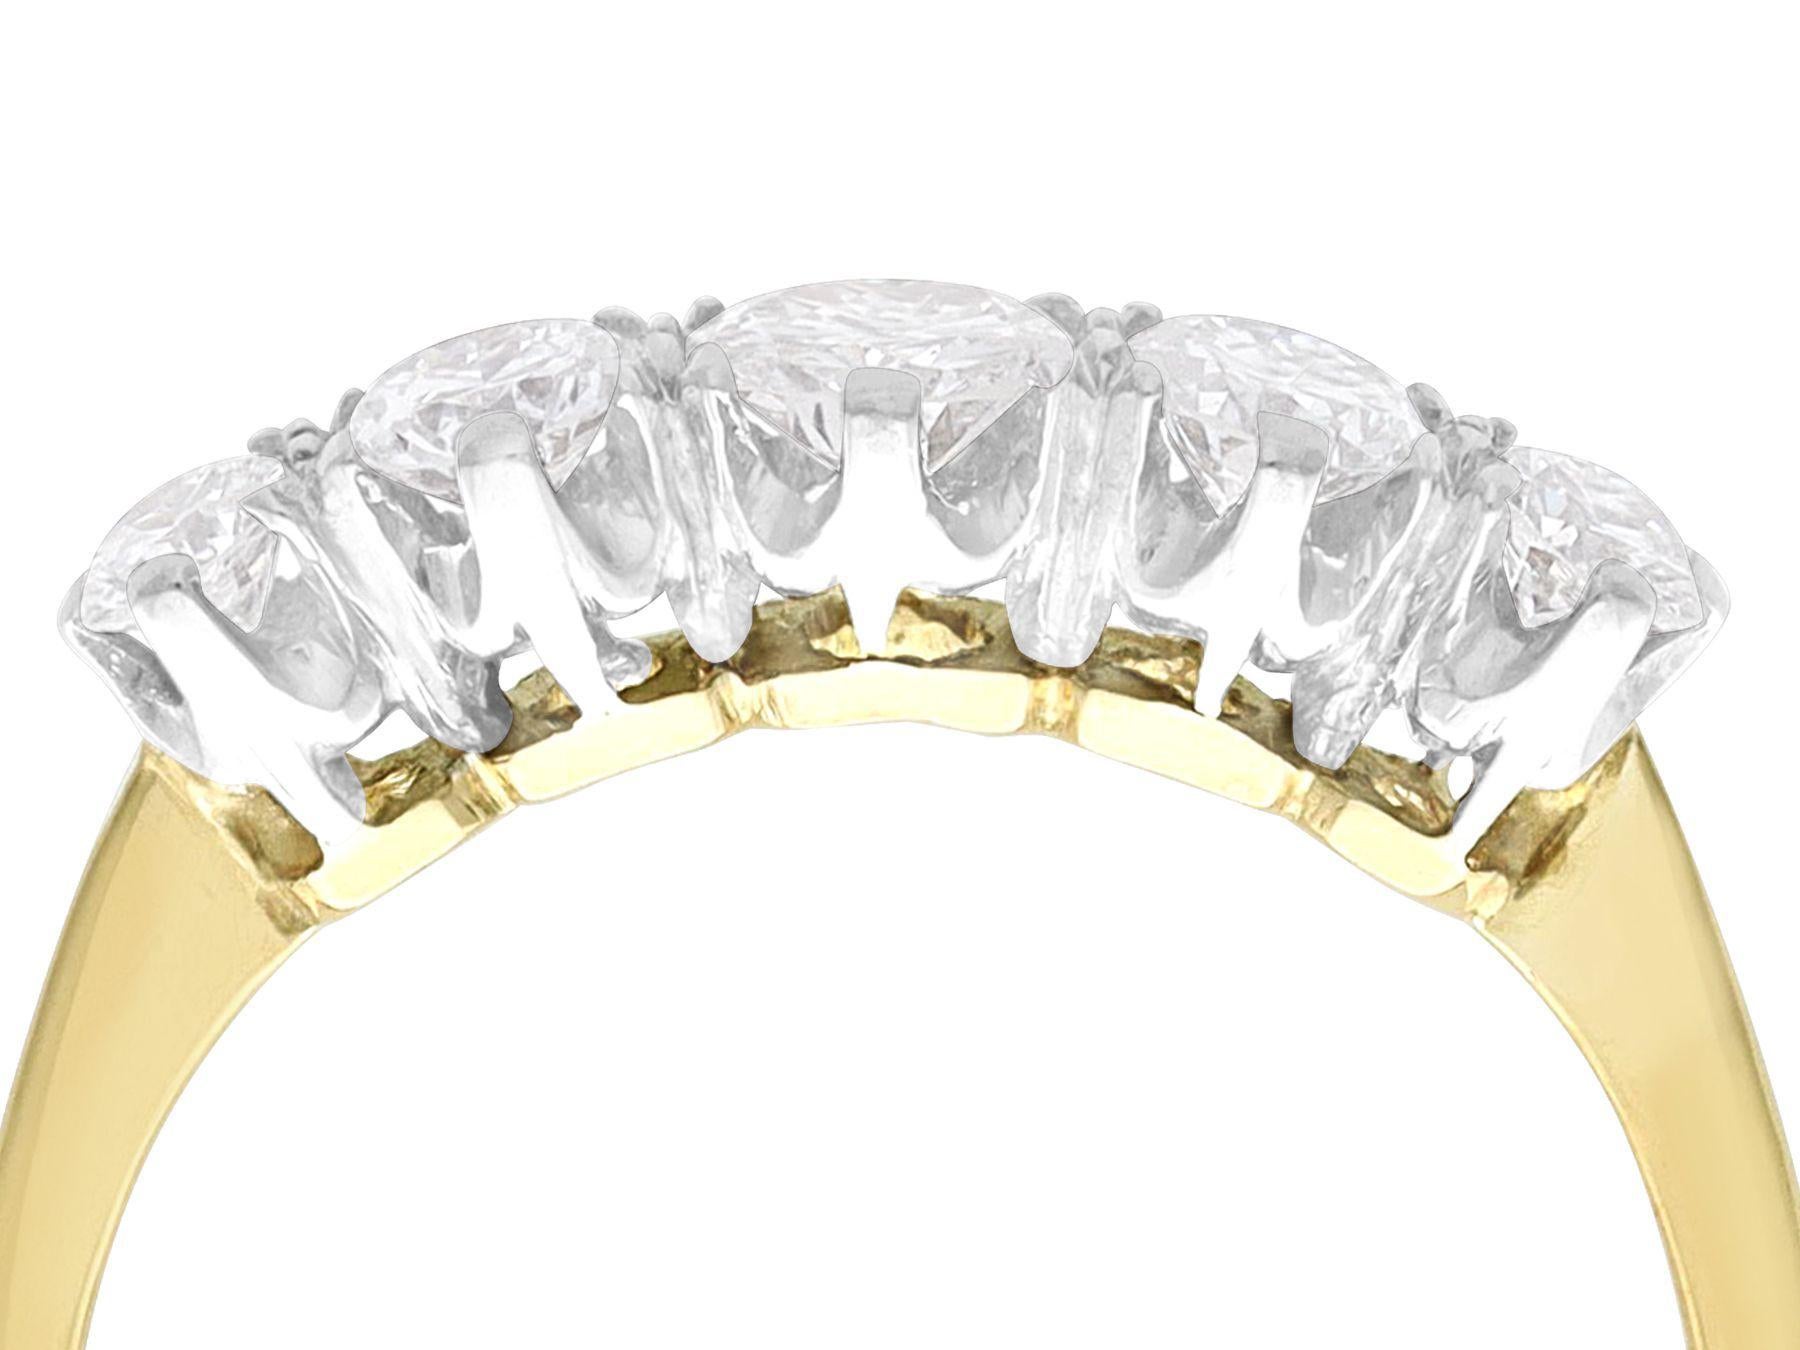 A fine and impressive antique 0.73 carat diamond, 18 karat yellow gold and platinum set five stone ring; part of our antique jewelry and estate jewelry collections.

This fine and impressive antique five stone ring has been crafted in 18k yellow